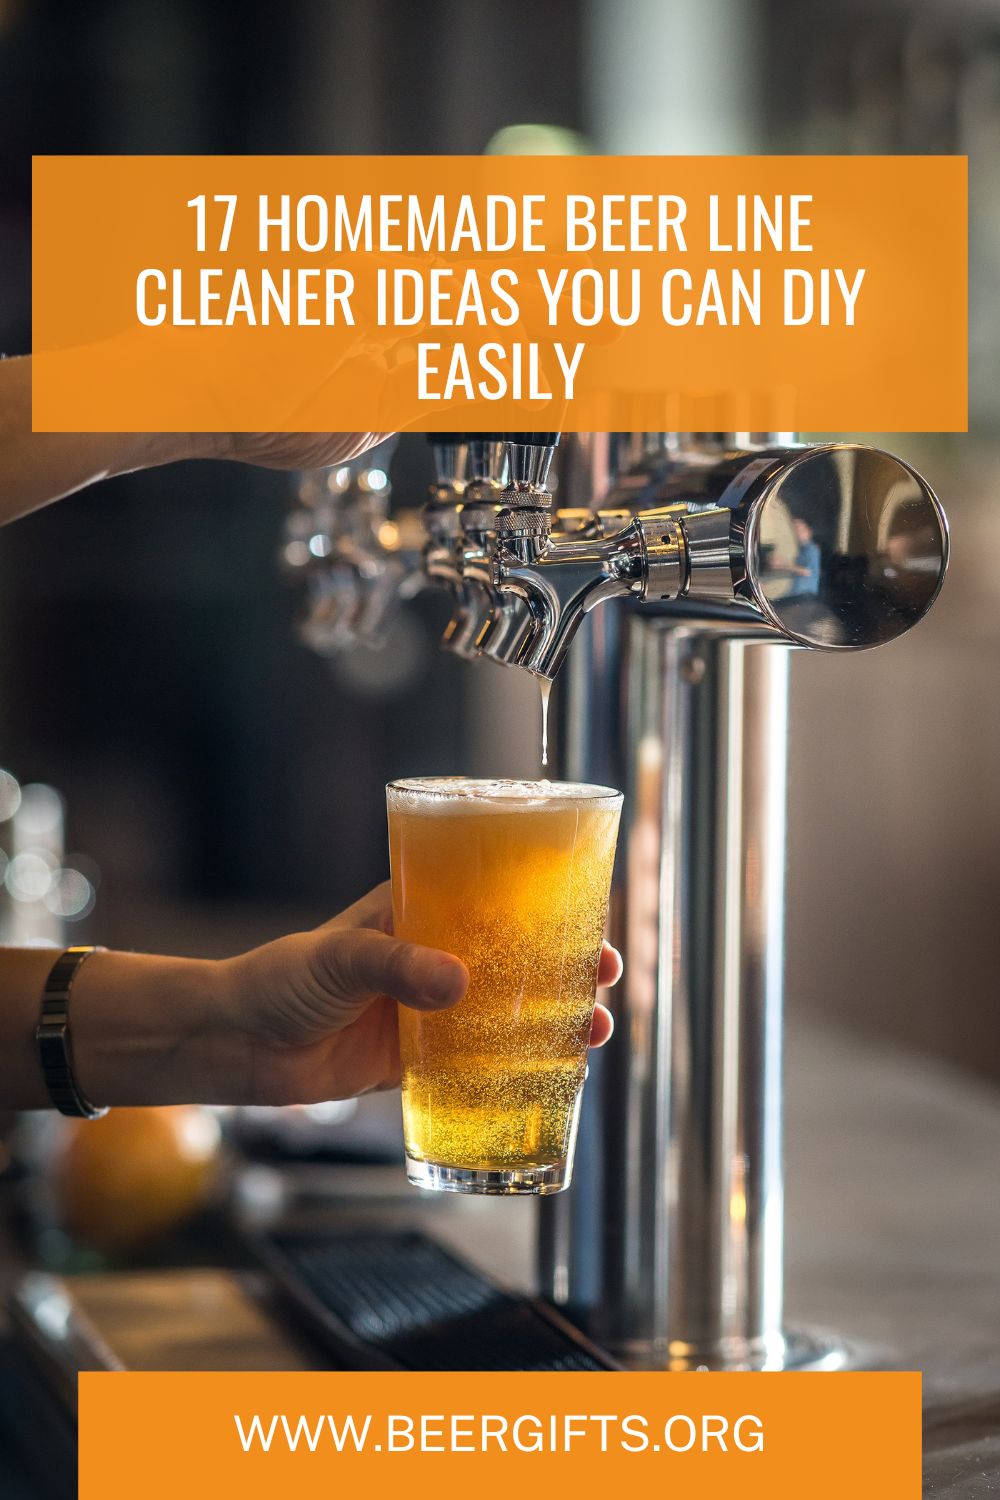 17 Homemade Beer Line Cleaner Ideas You Can DIY Easily1